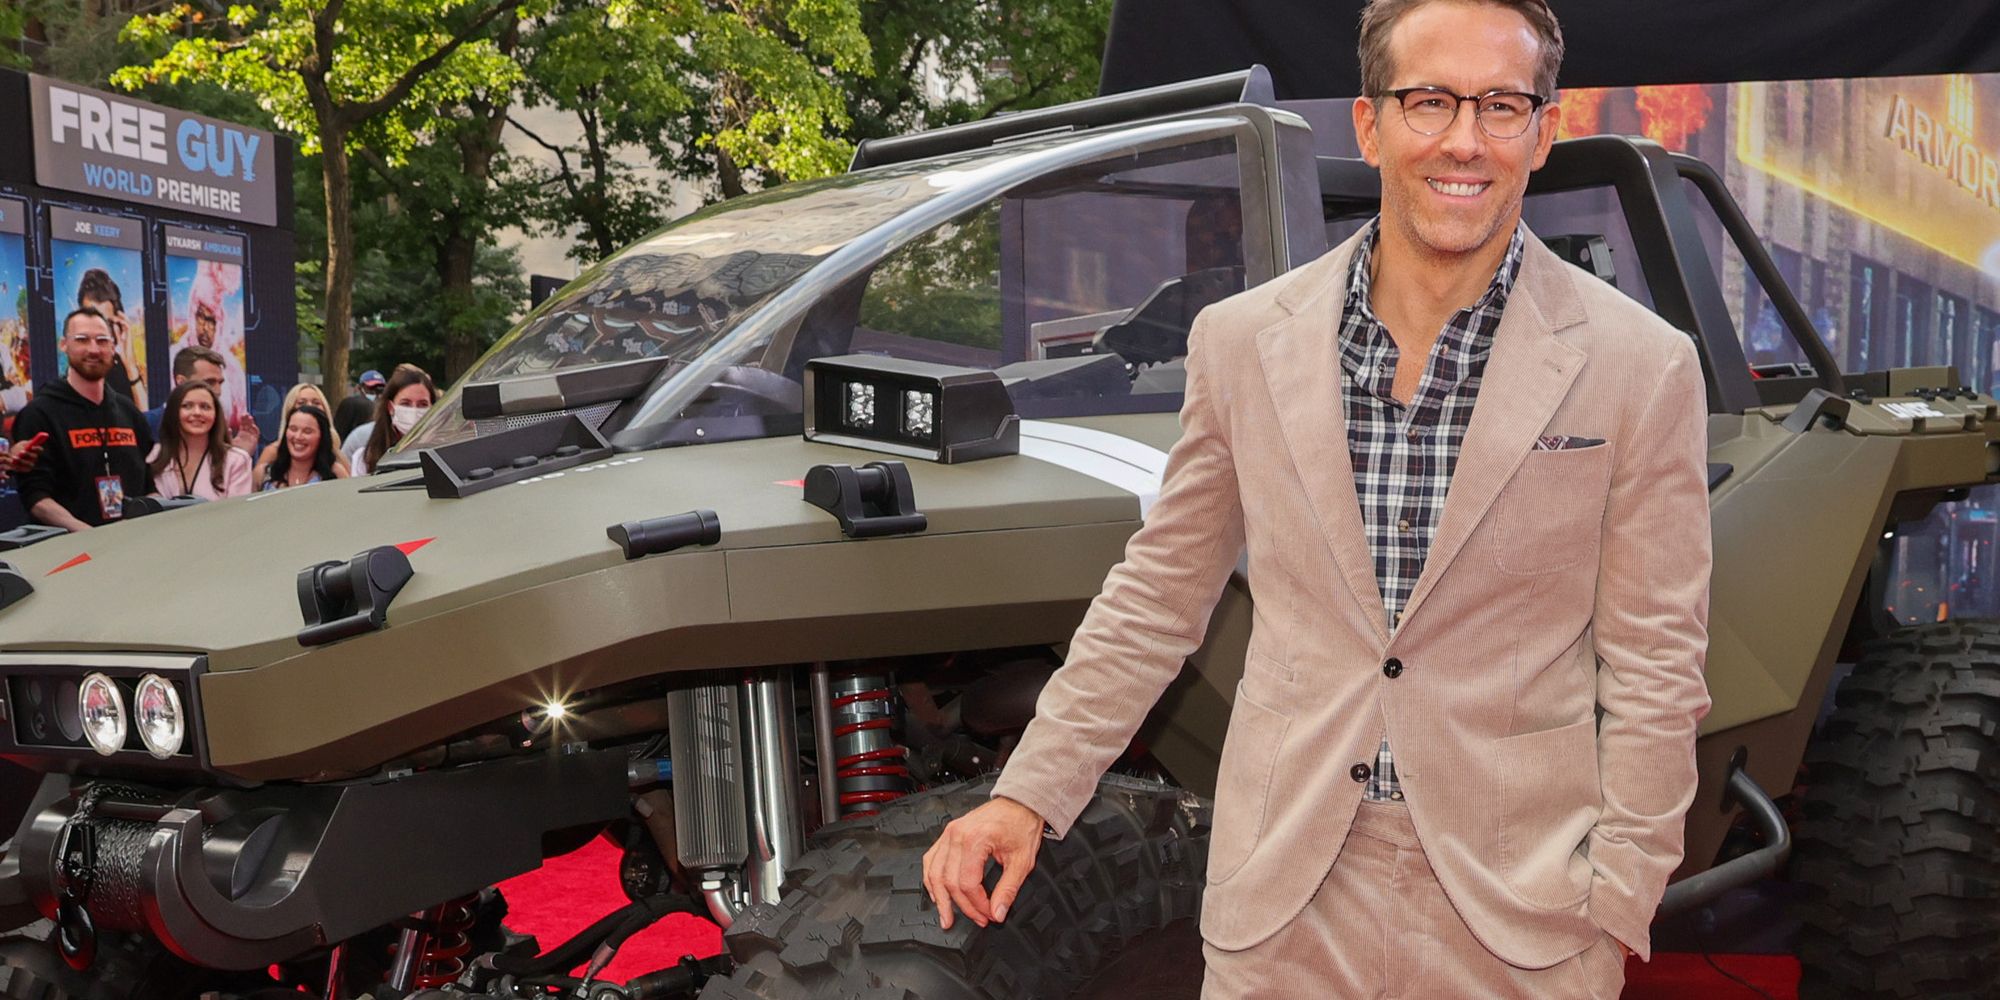 Ryan Reynolds standing in front of a Halo warthog for the Free Guy premiere